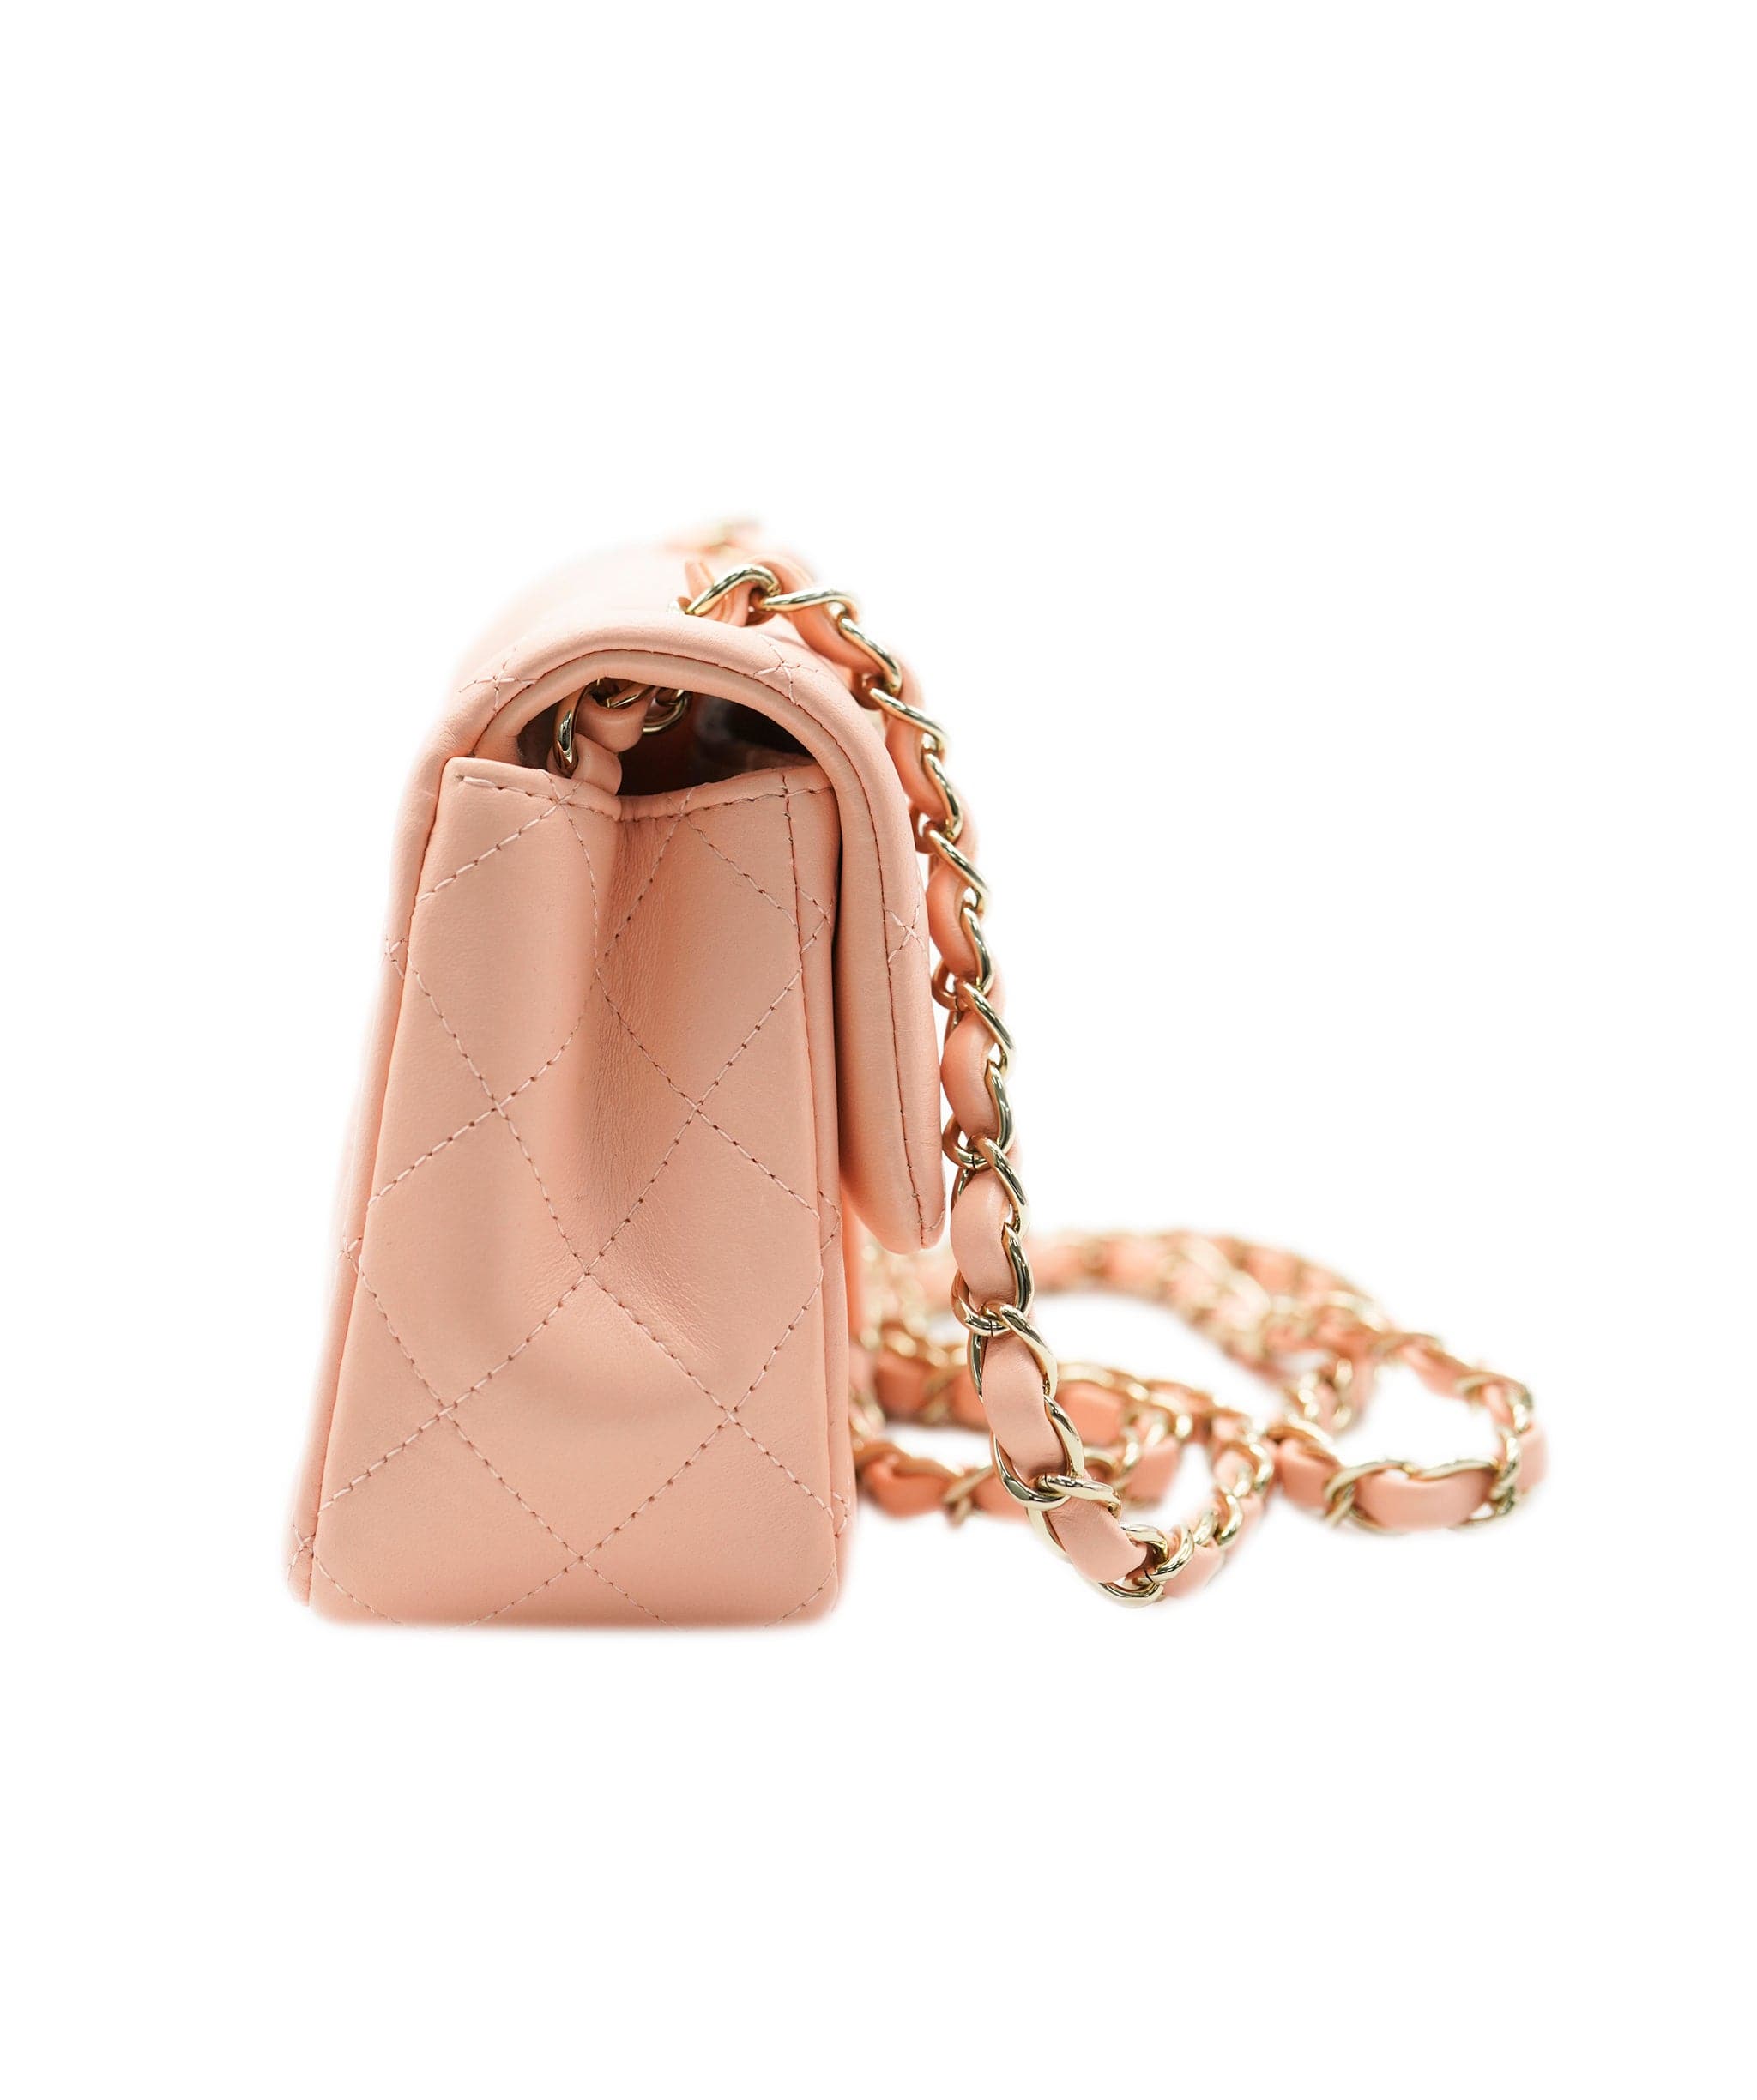 Chanel Chanel mini rectangular pink classic flap with champagne gold hardware - AJC0655